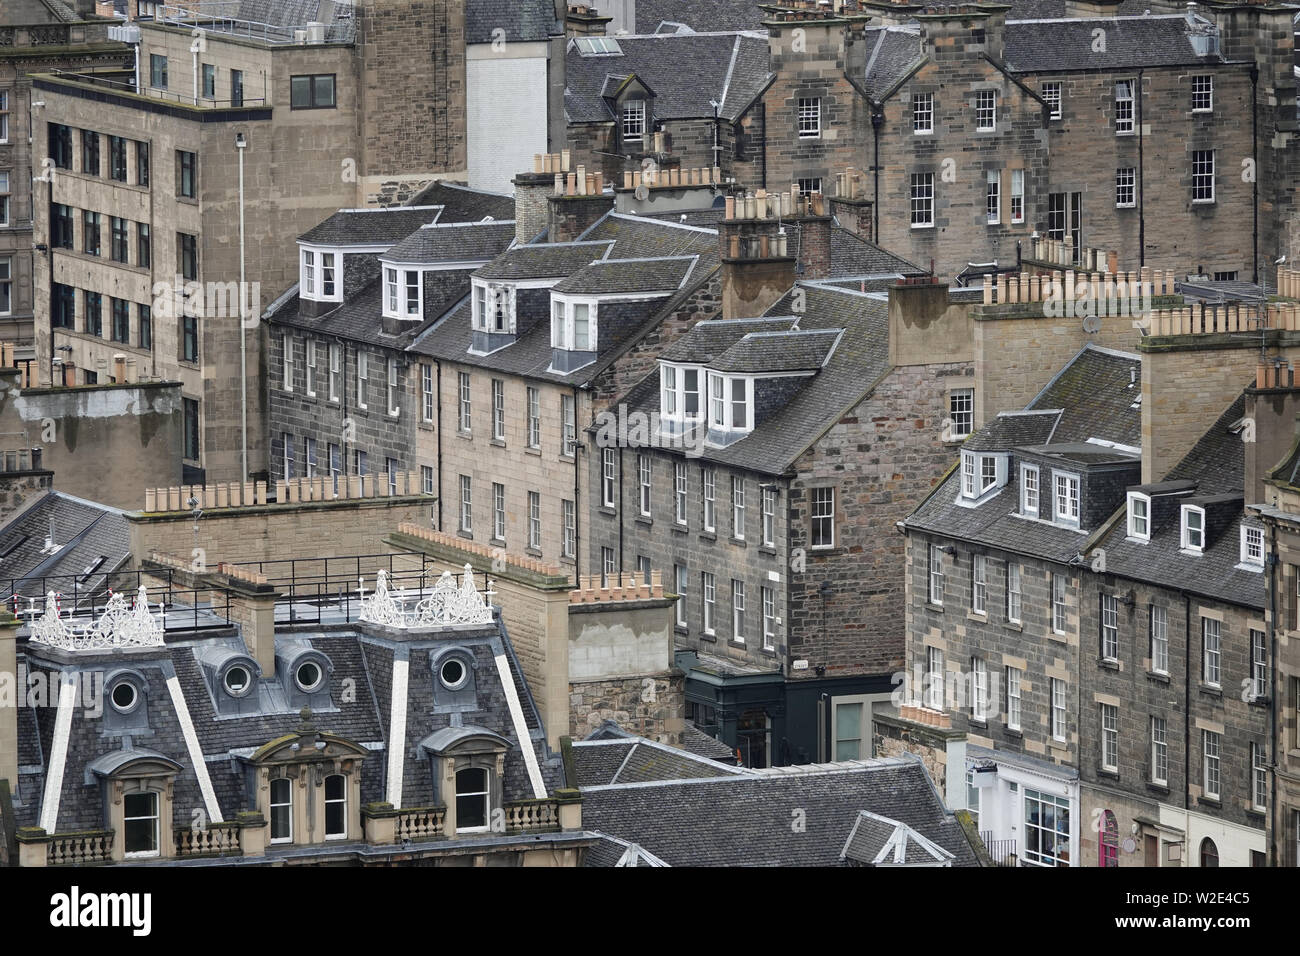 Rooftops of old, sandstone buildings in Edinburgh, Scotland are shown from an elevated view during the day. Stock Photo